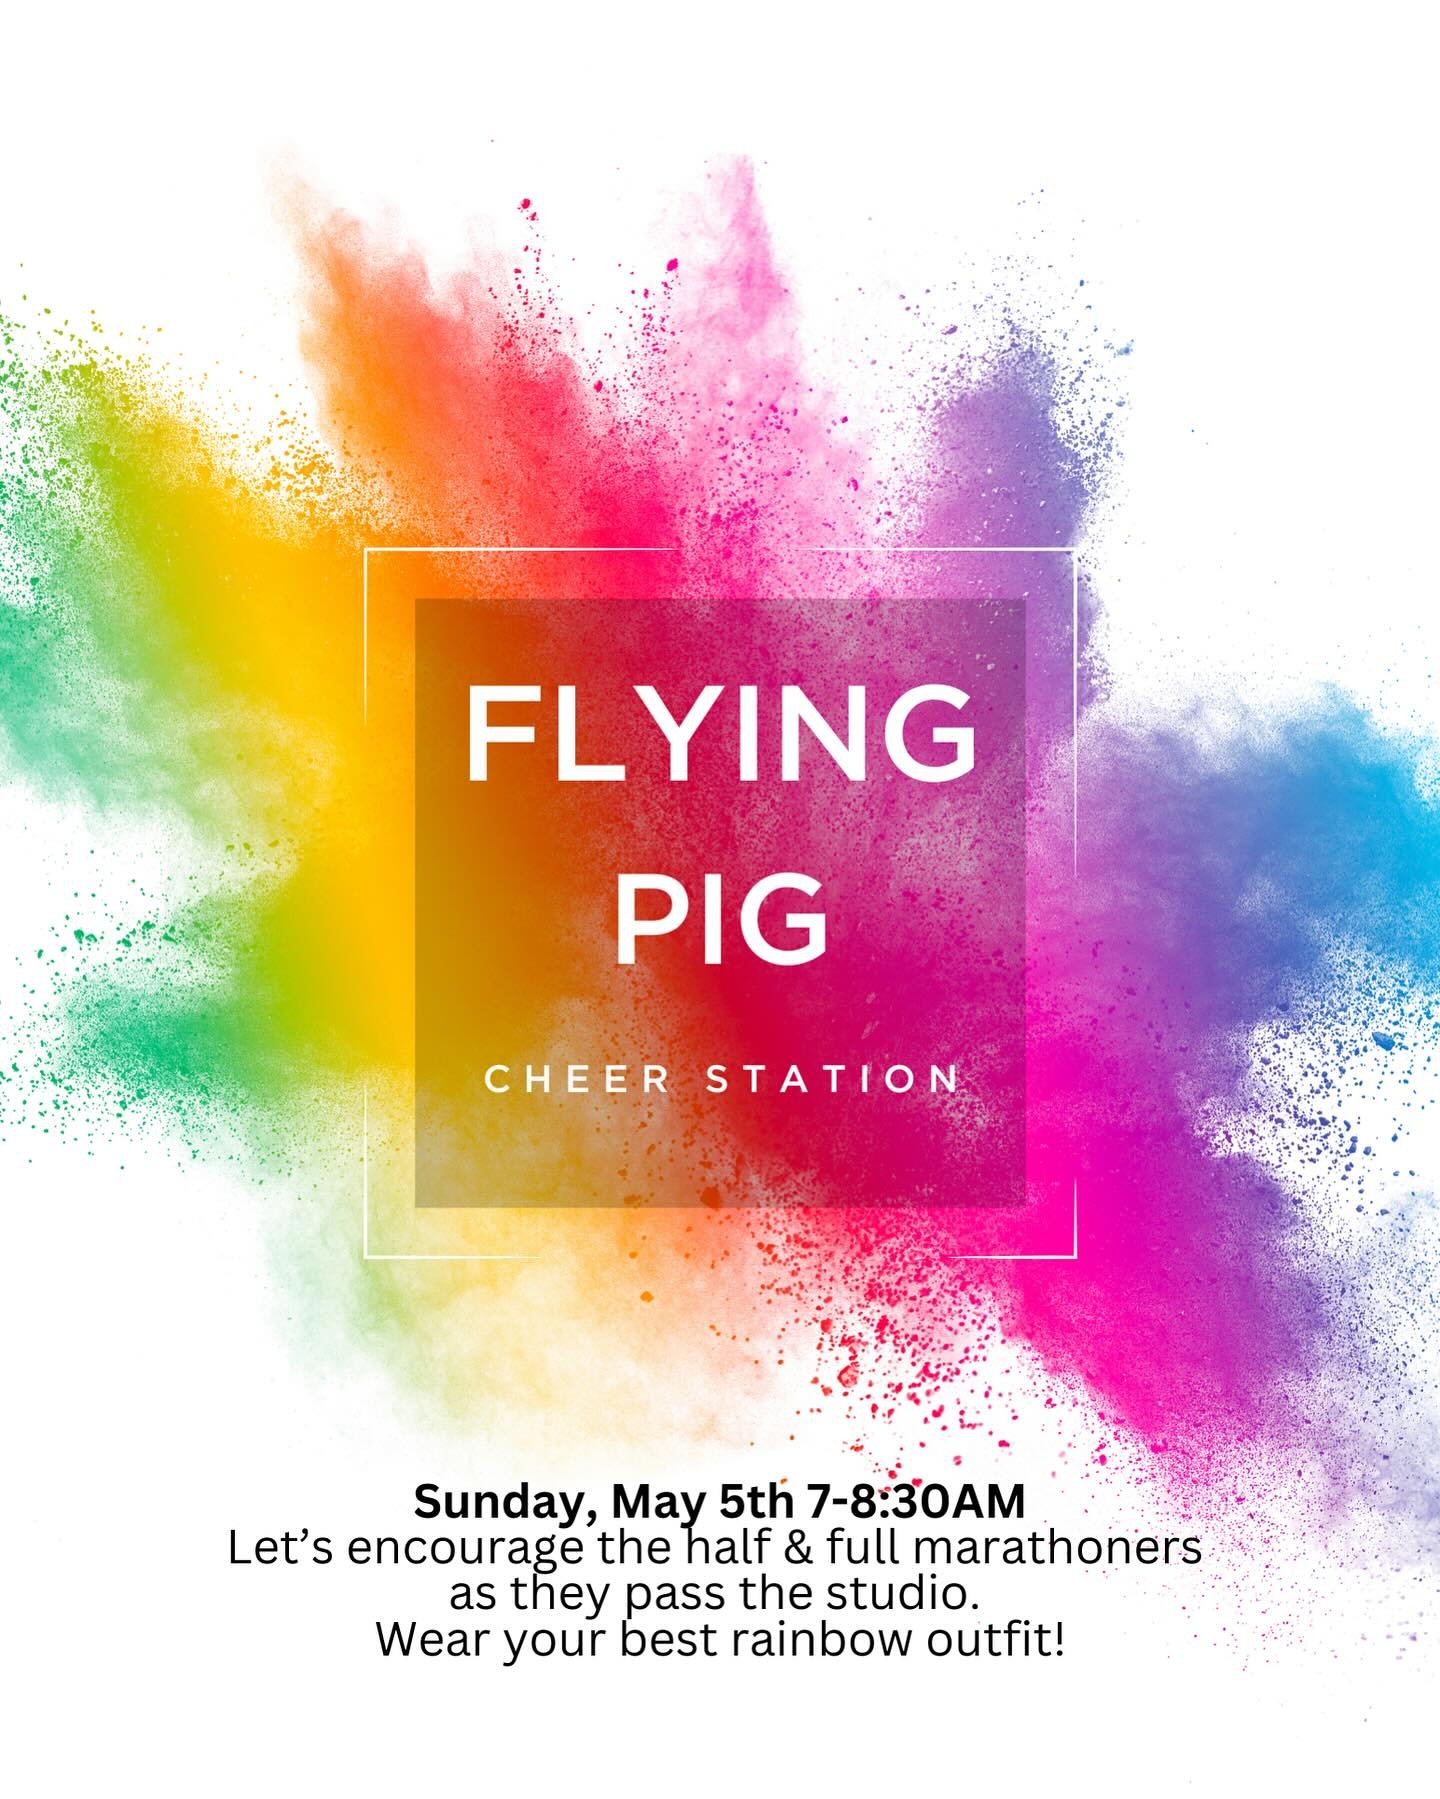 We&rsquo;re hosting an early morning party next Sunday, who&rsquo;s in? 

7-8:30am @studio s
Wear your best rainbow outfit, we&rsquo;ll supply breakfast. 

Support Flying Pig athletes as the race (both half &amp; full marathon) passes right in front 